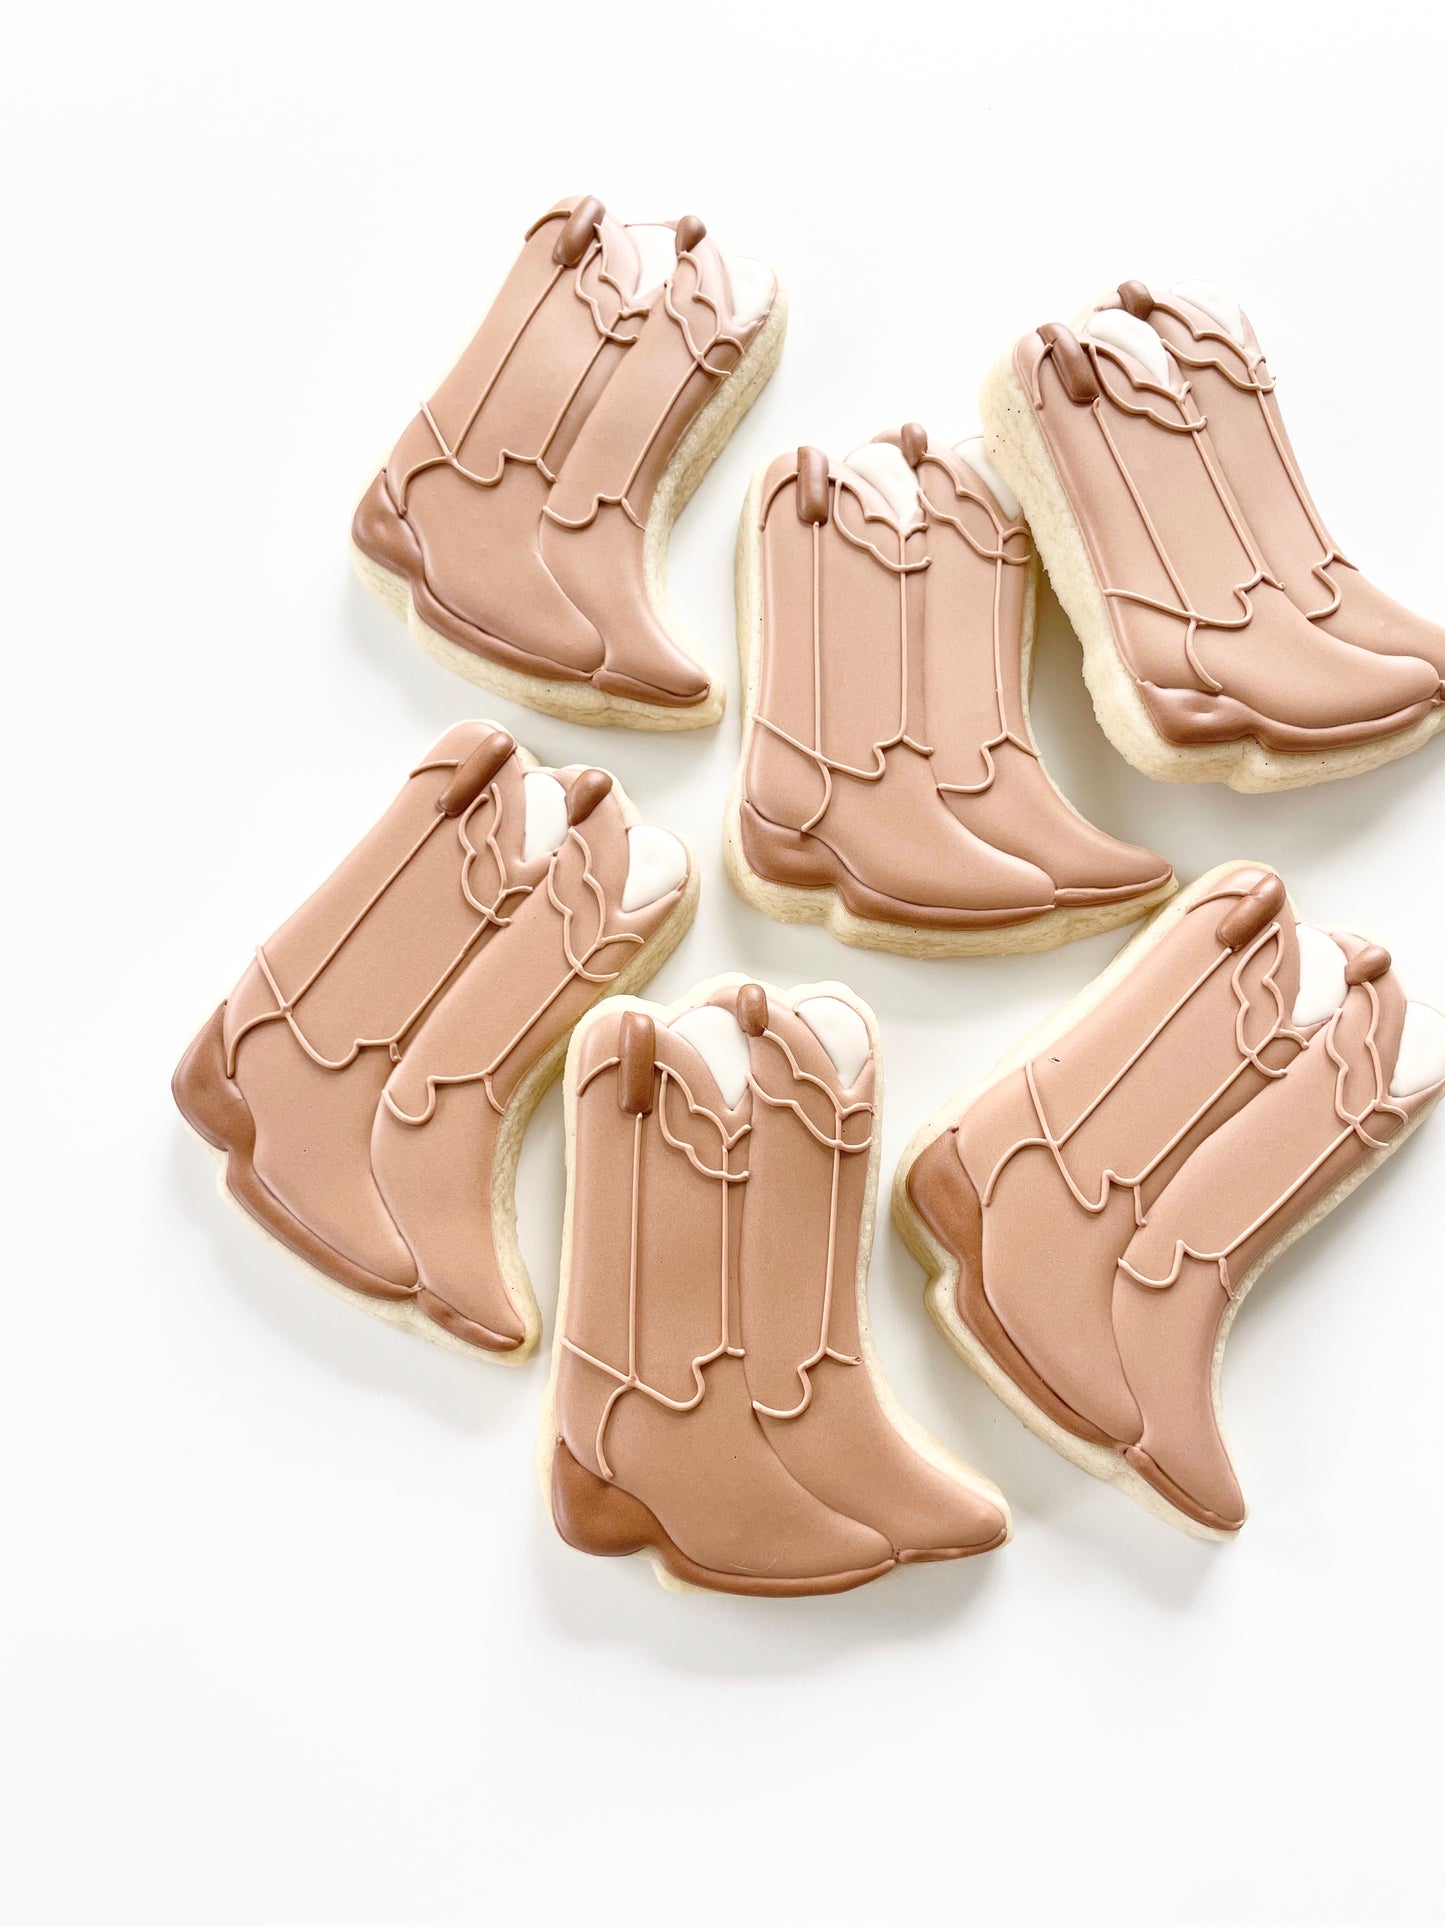 Double Cowboy Boots Cookie Cutter